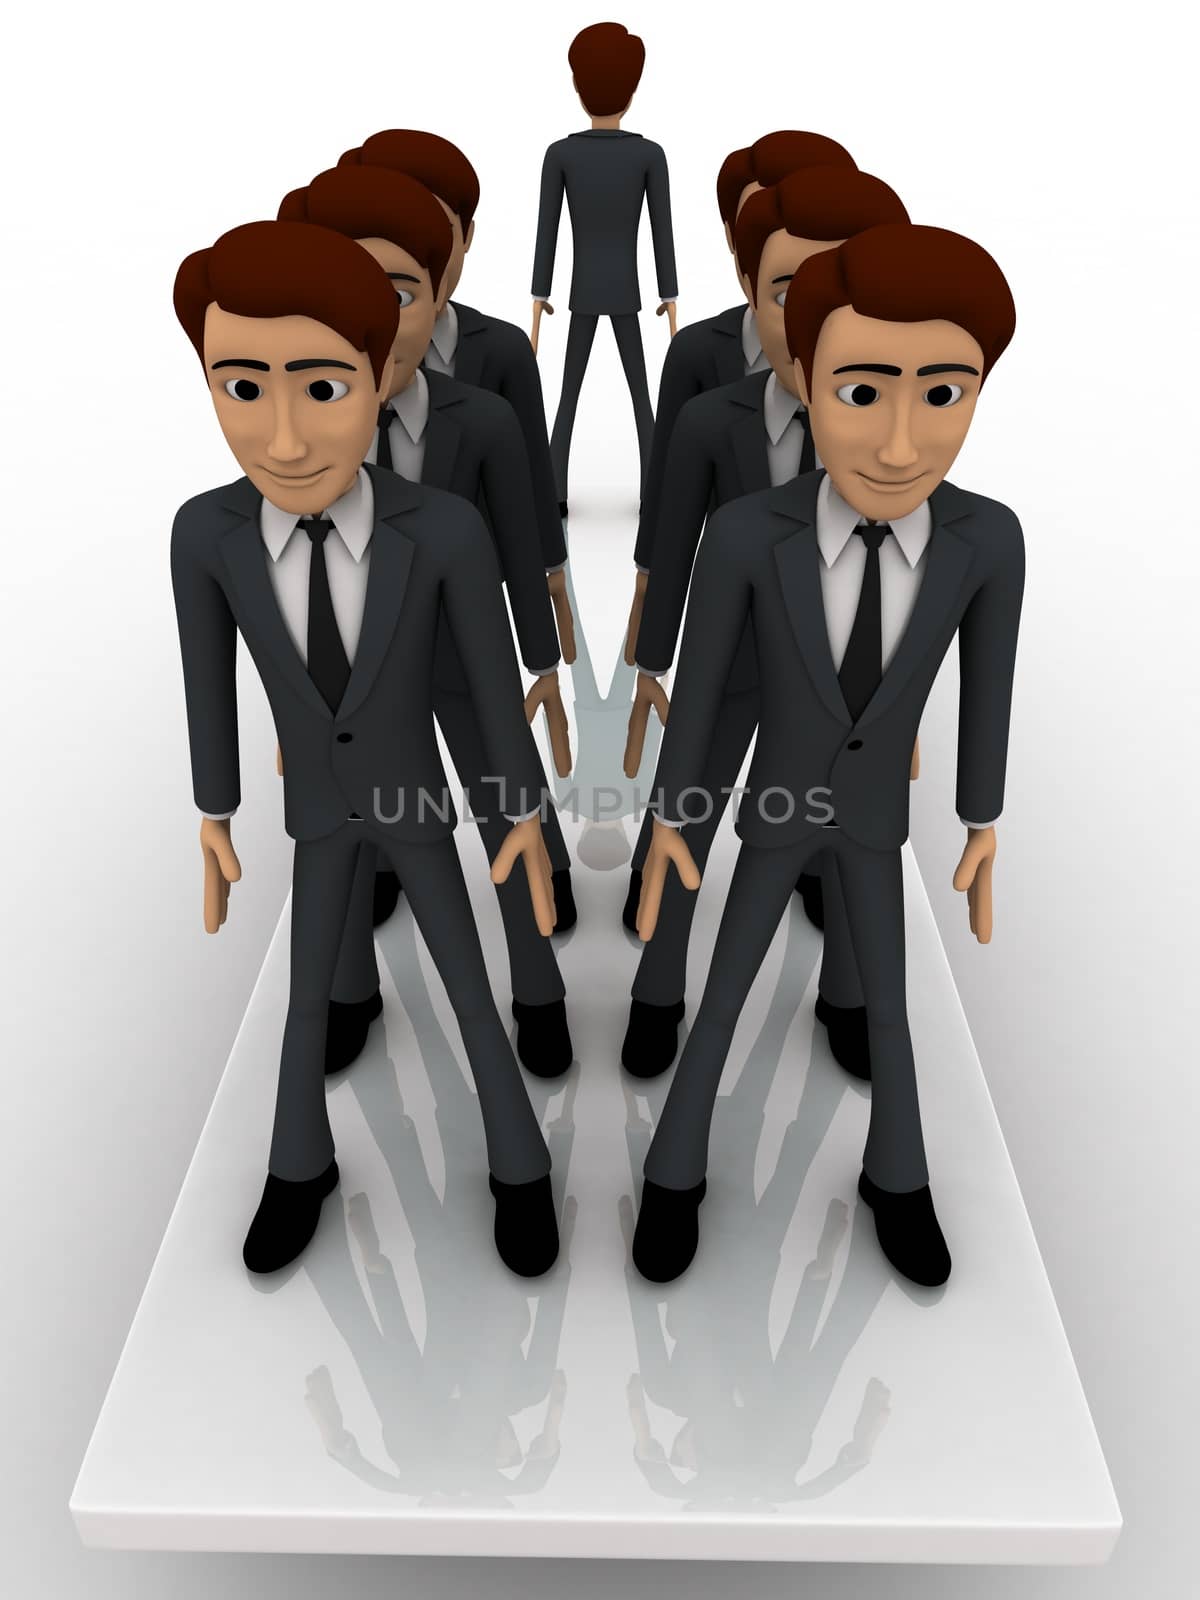 3d men standing seesaw one man on on side and group of men on other side concept by touchmenithin@gmail.com